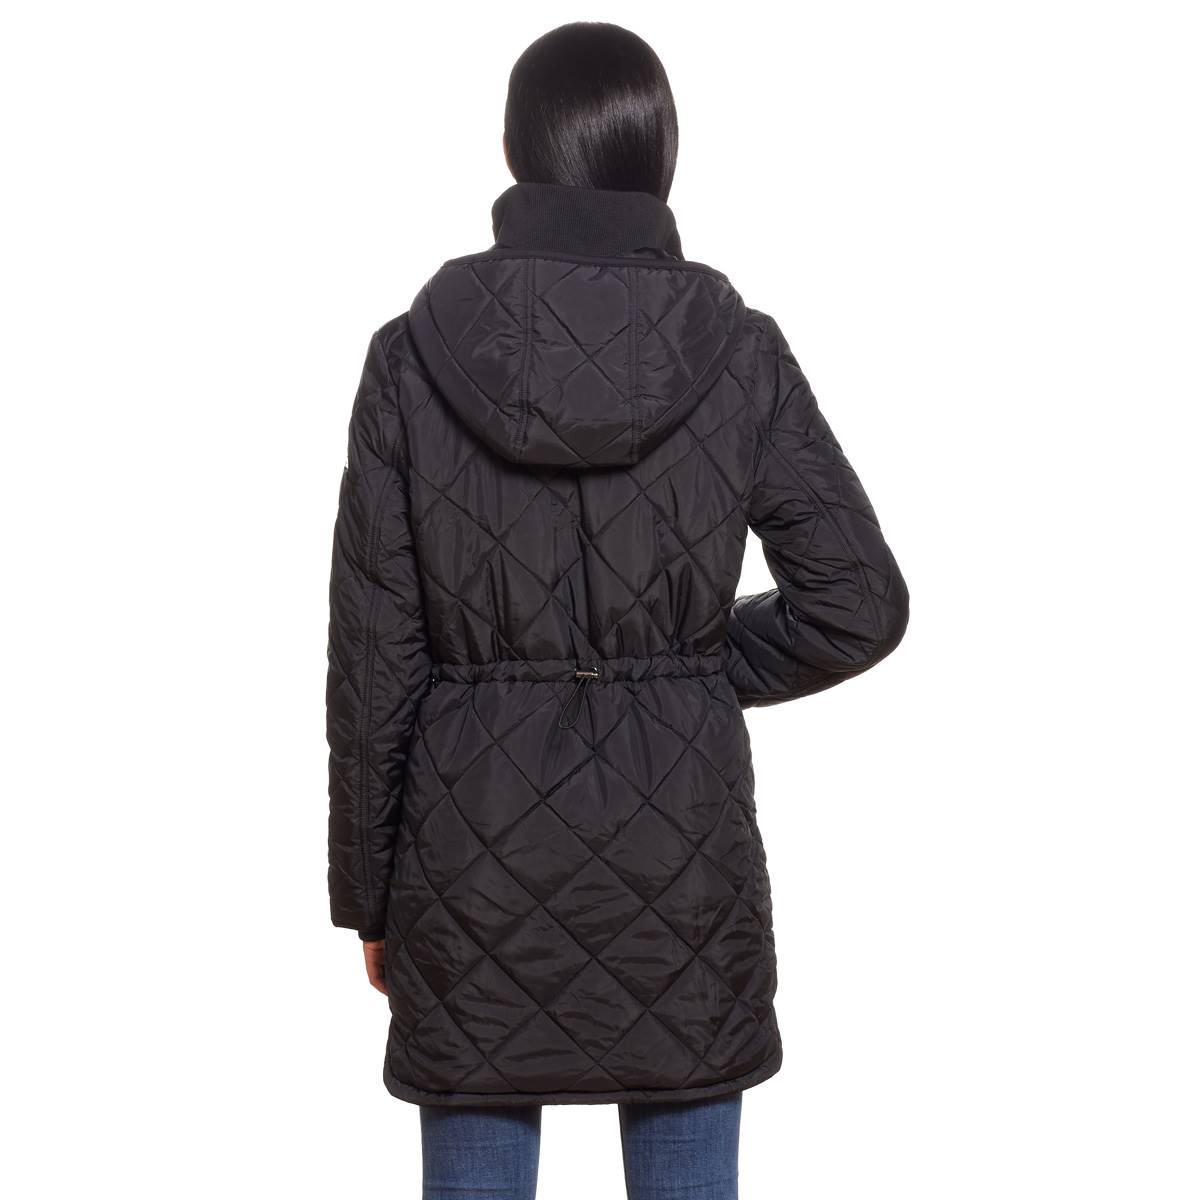 Petites Weatherproof(R) Quilted Walker W/Side Stretch